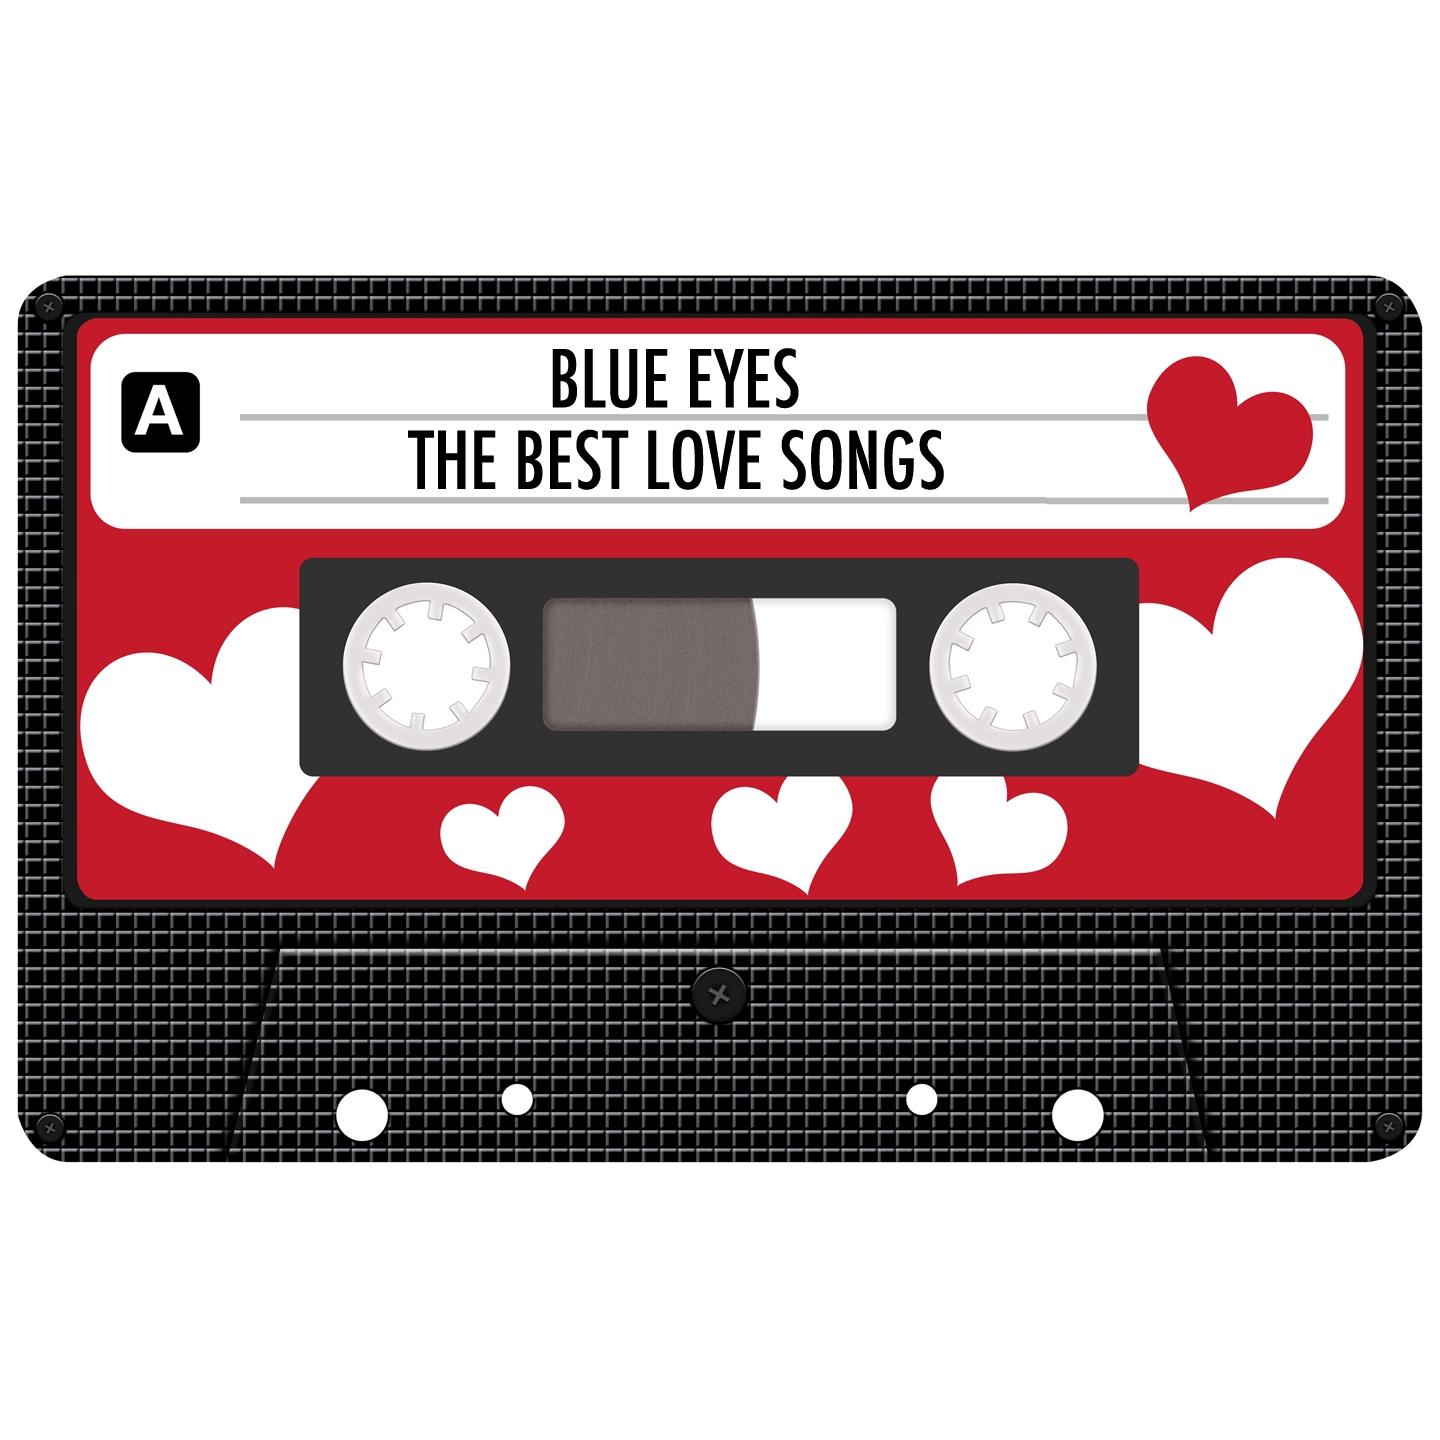 H.o.t.S Presents : The Very Best of Love Songs of Blue Eyes, Vol. 01